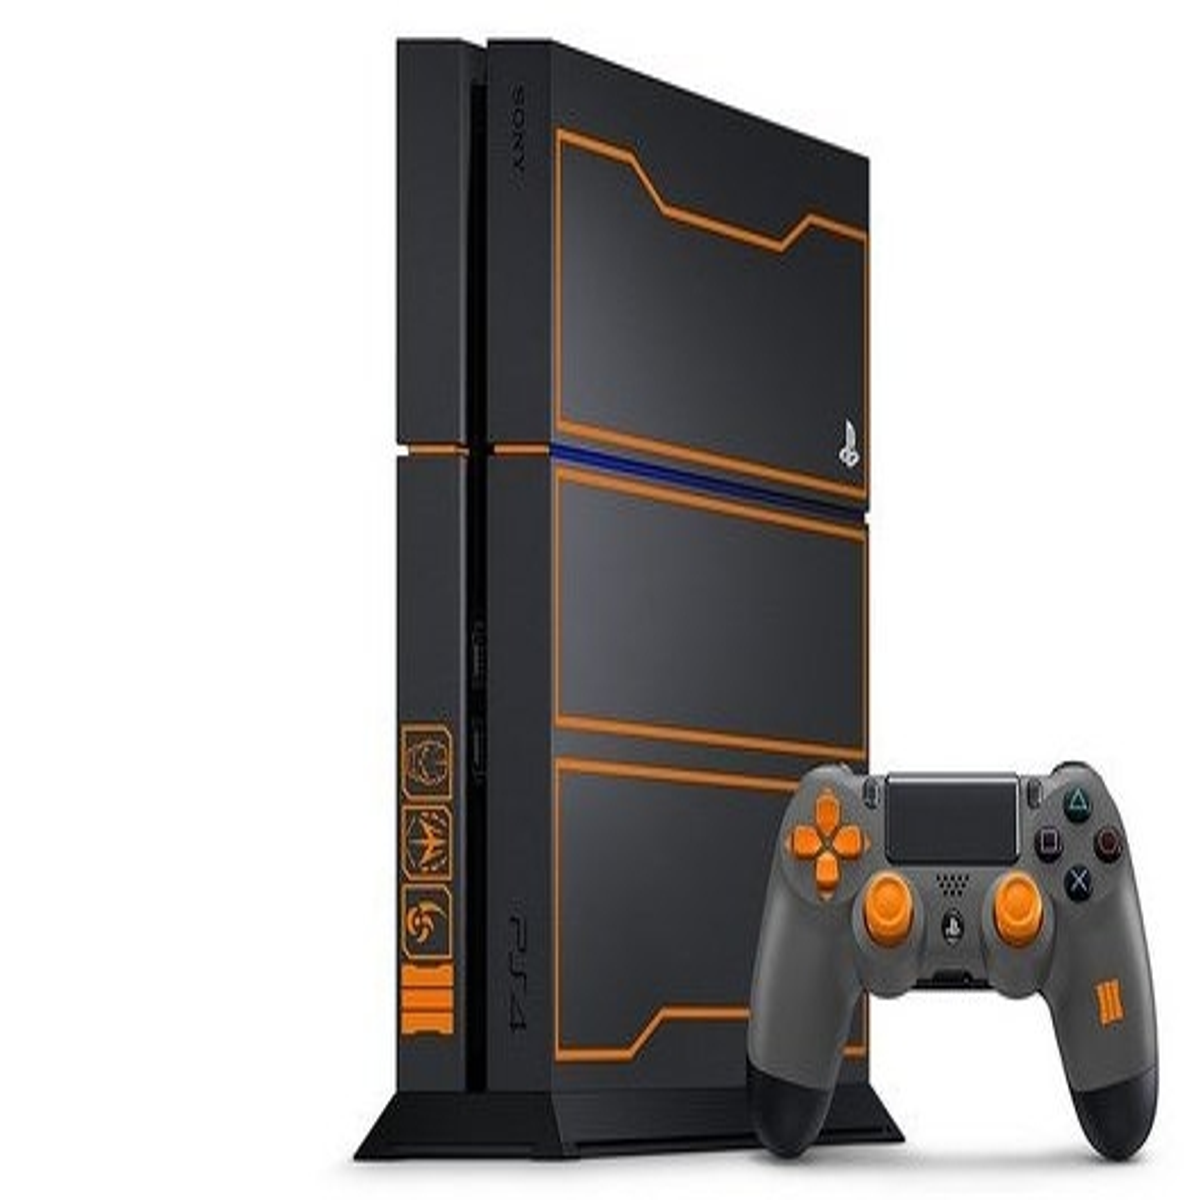 PS4 Call of Duty Black Ops III 3 Limited Edition 1TB Box Console [BOX] 